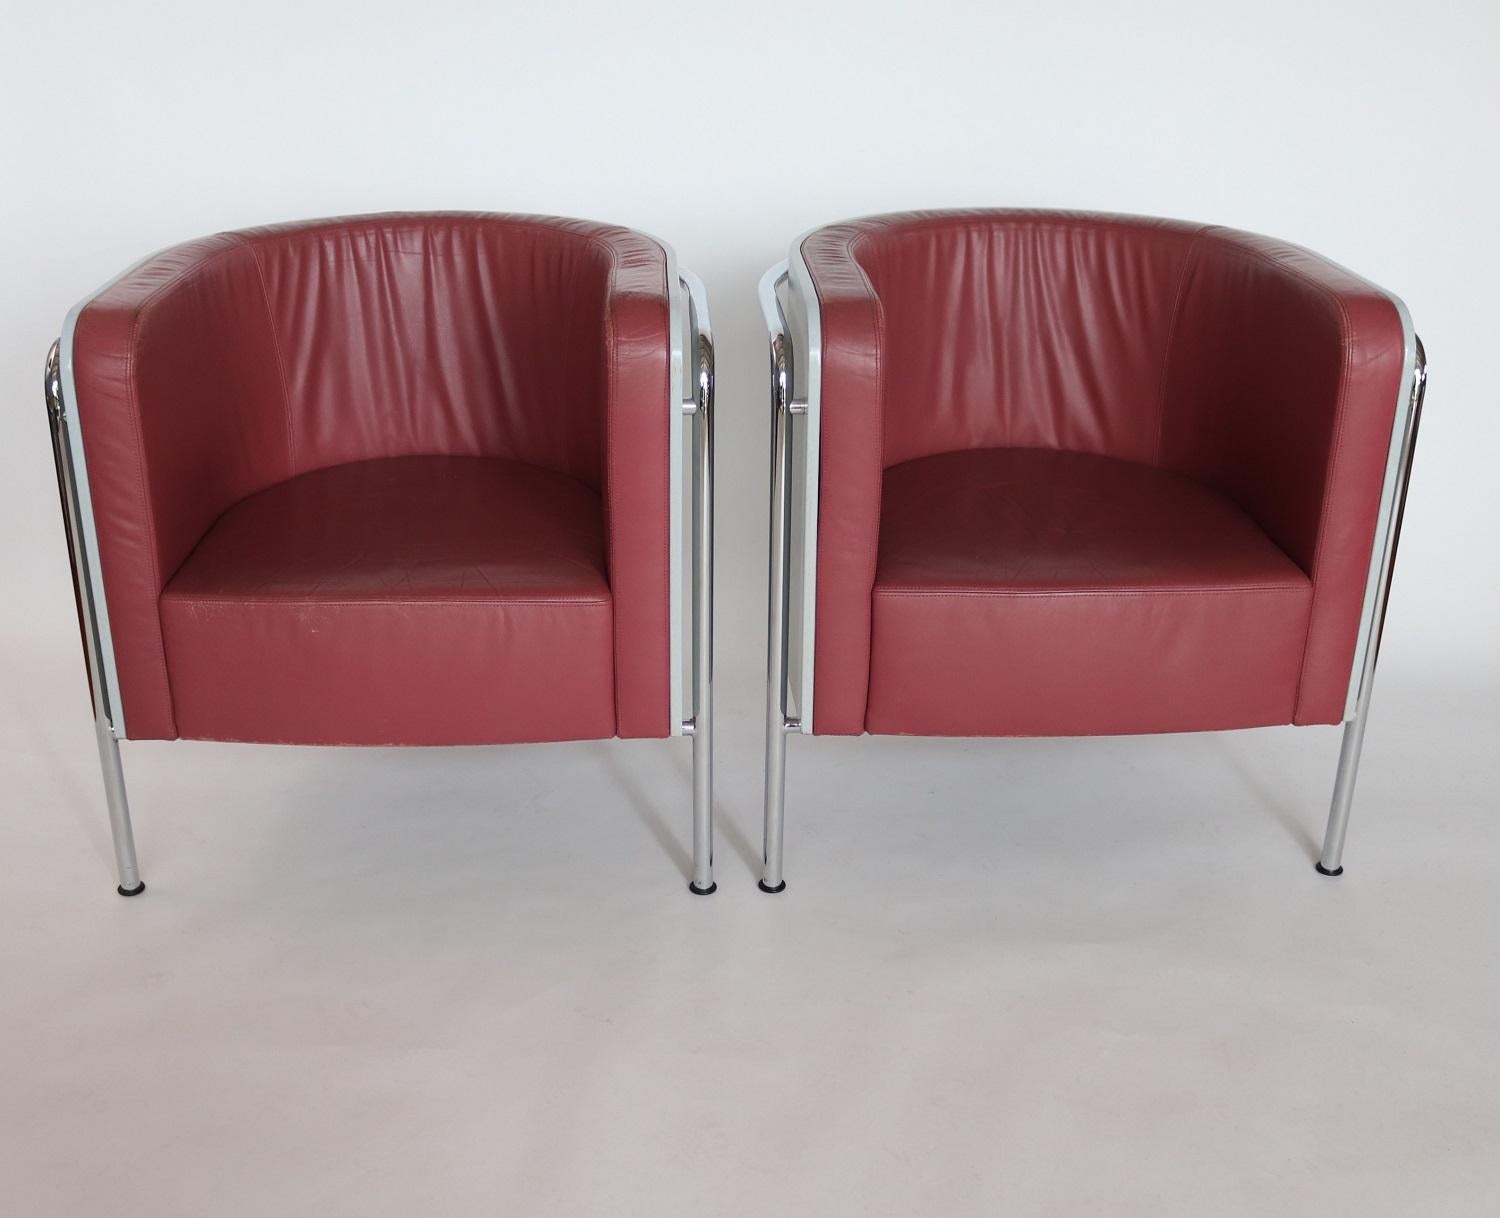 Late 20th Century Lounge Chairs in Bentwood and Leather by Christoph Zschocke for Thonet, 1990s For Sale